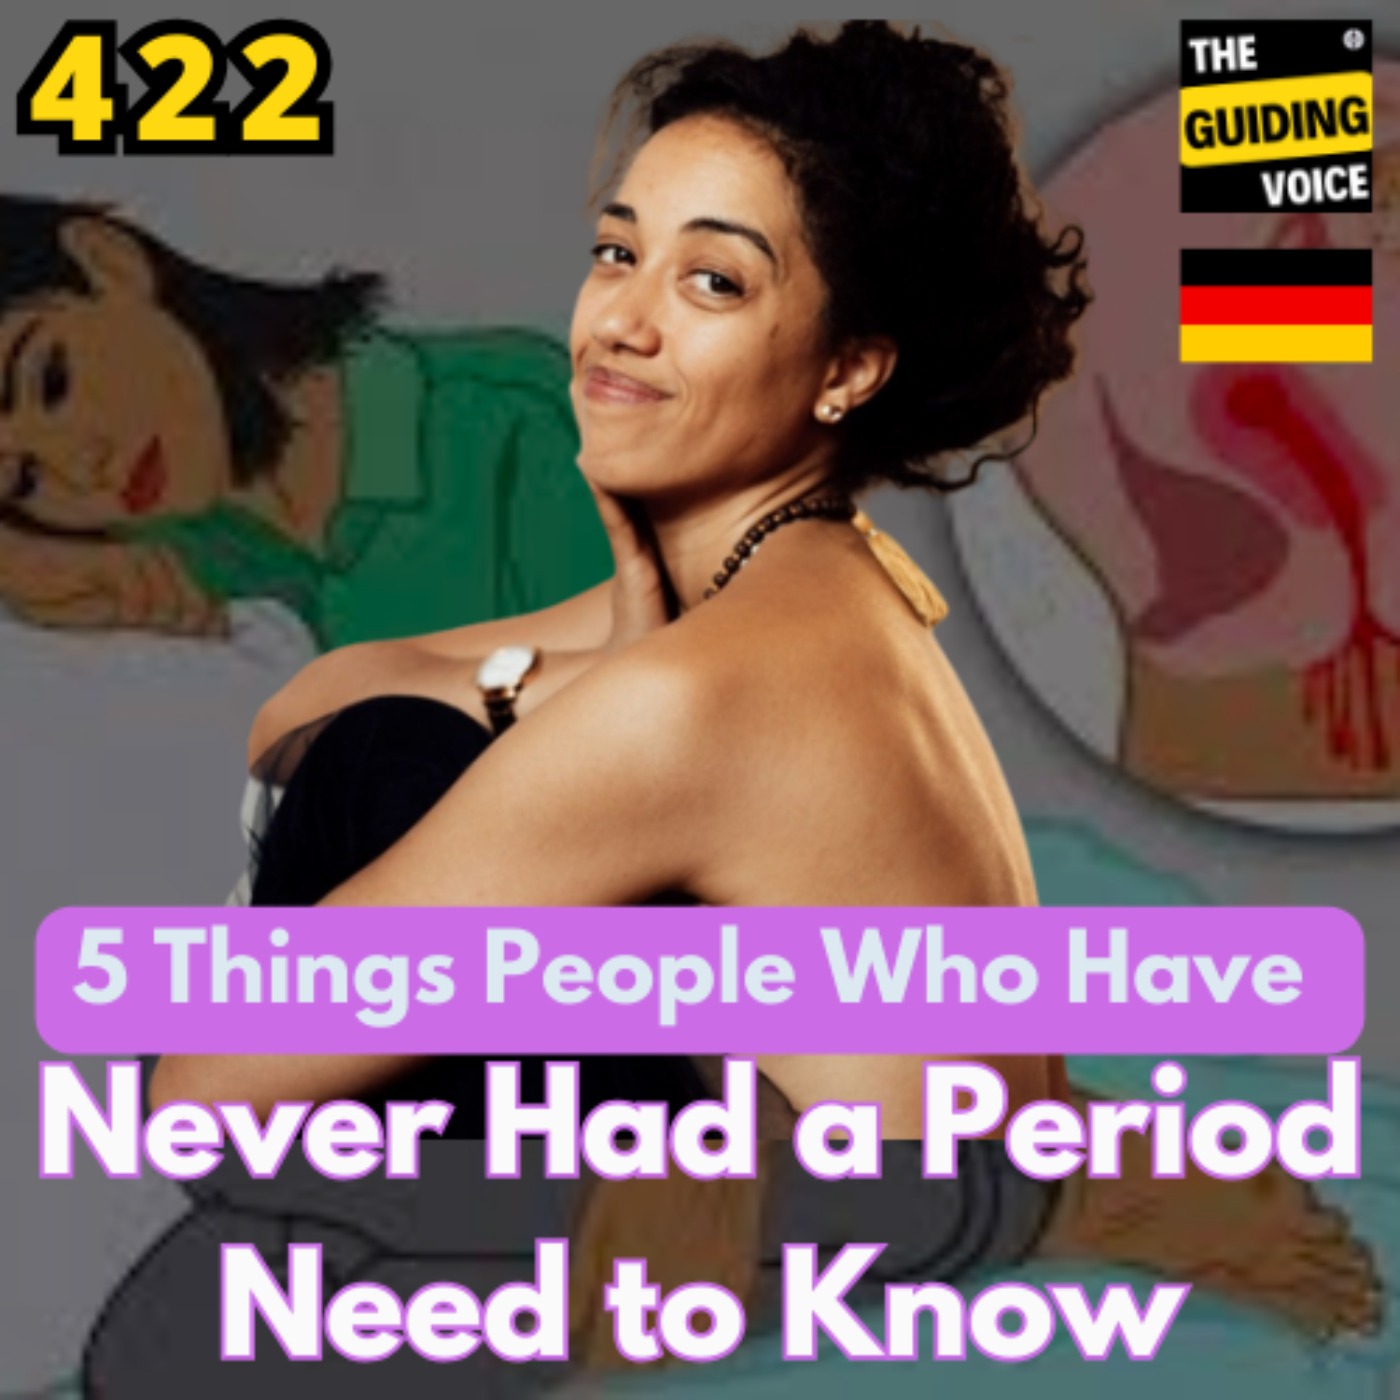 5 Things People Who Have Never Had a Period Need to Know | Christine Marie | #TGVGlobalspeakerseries | #TGV422